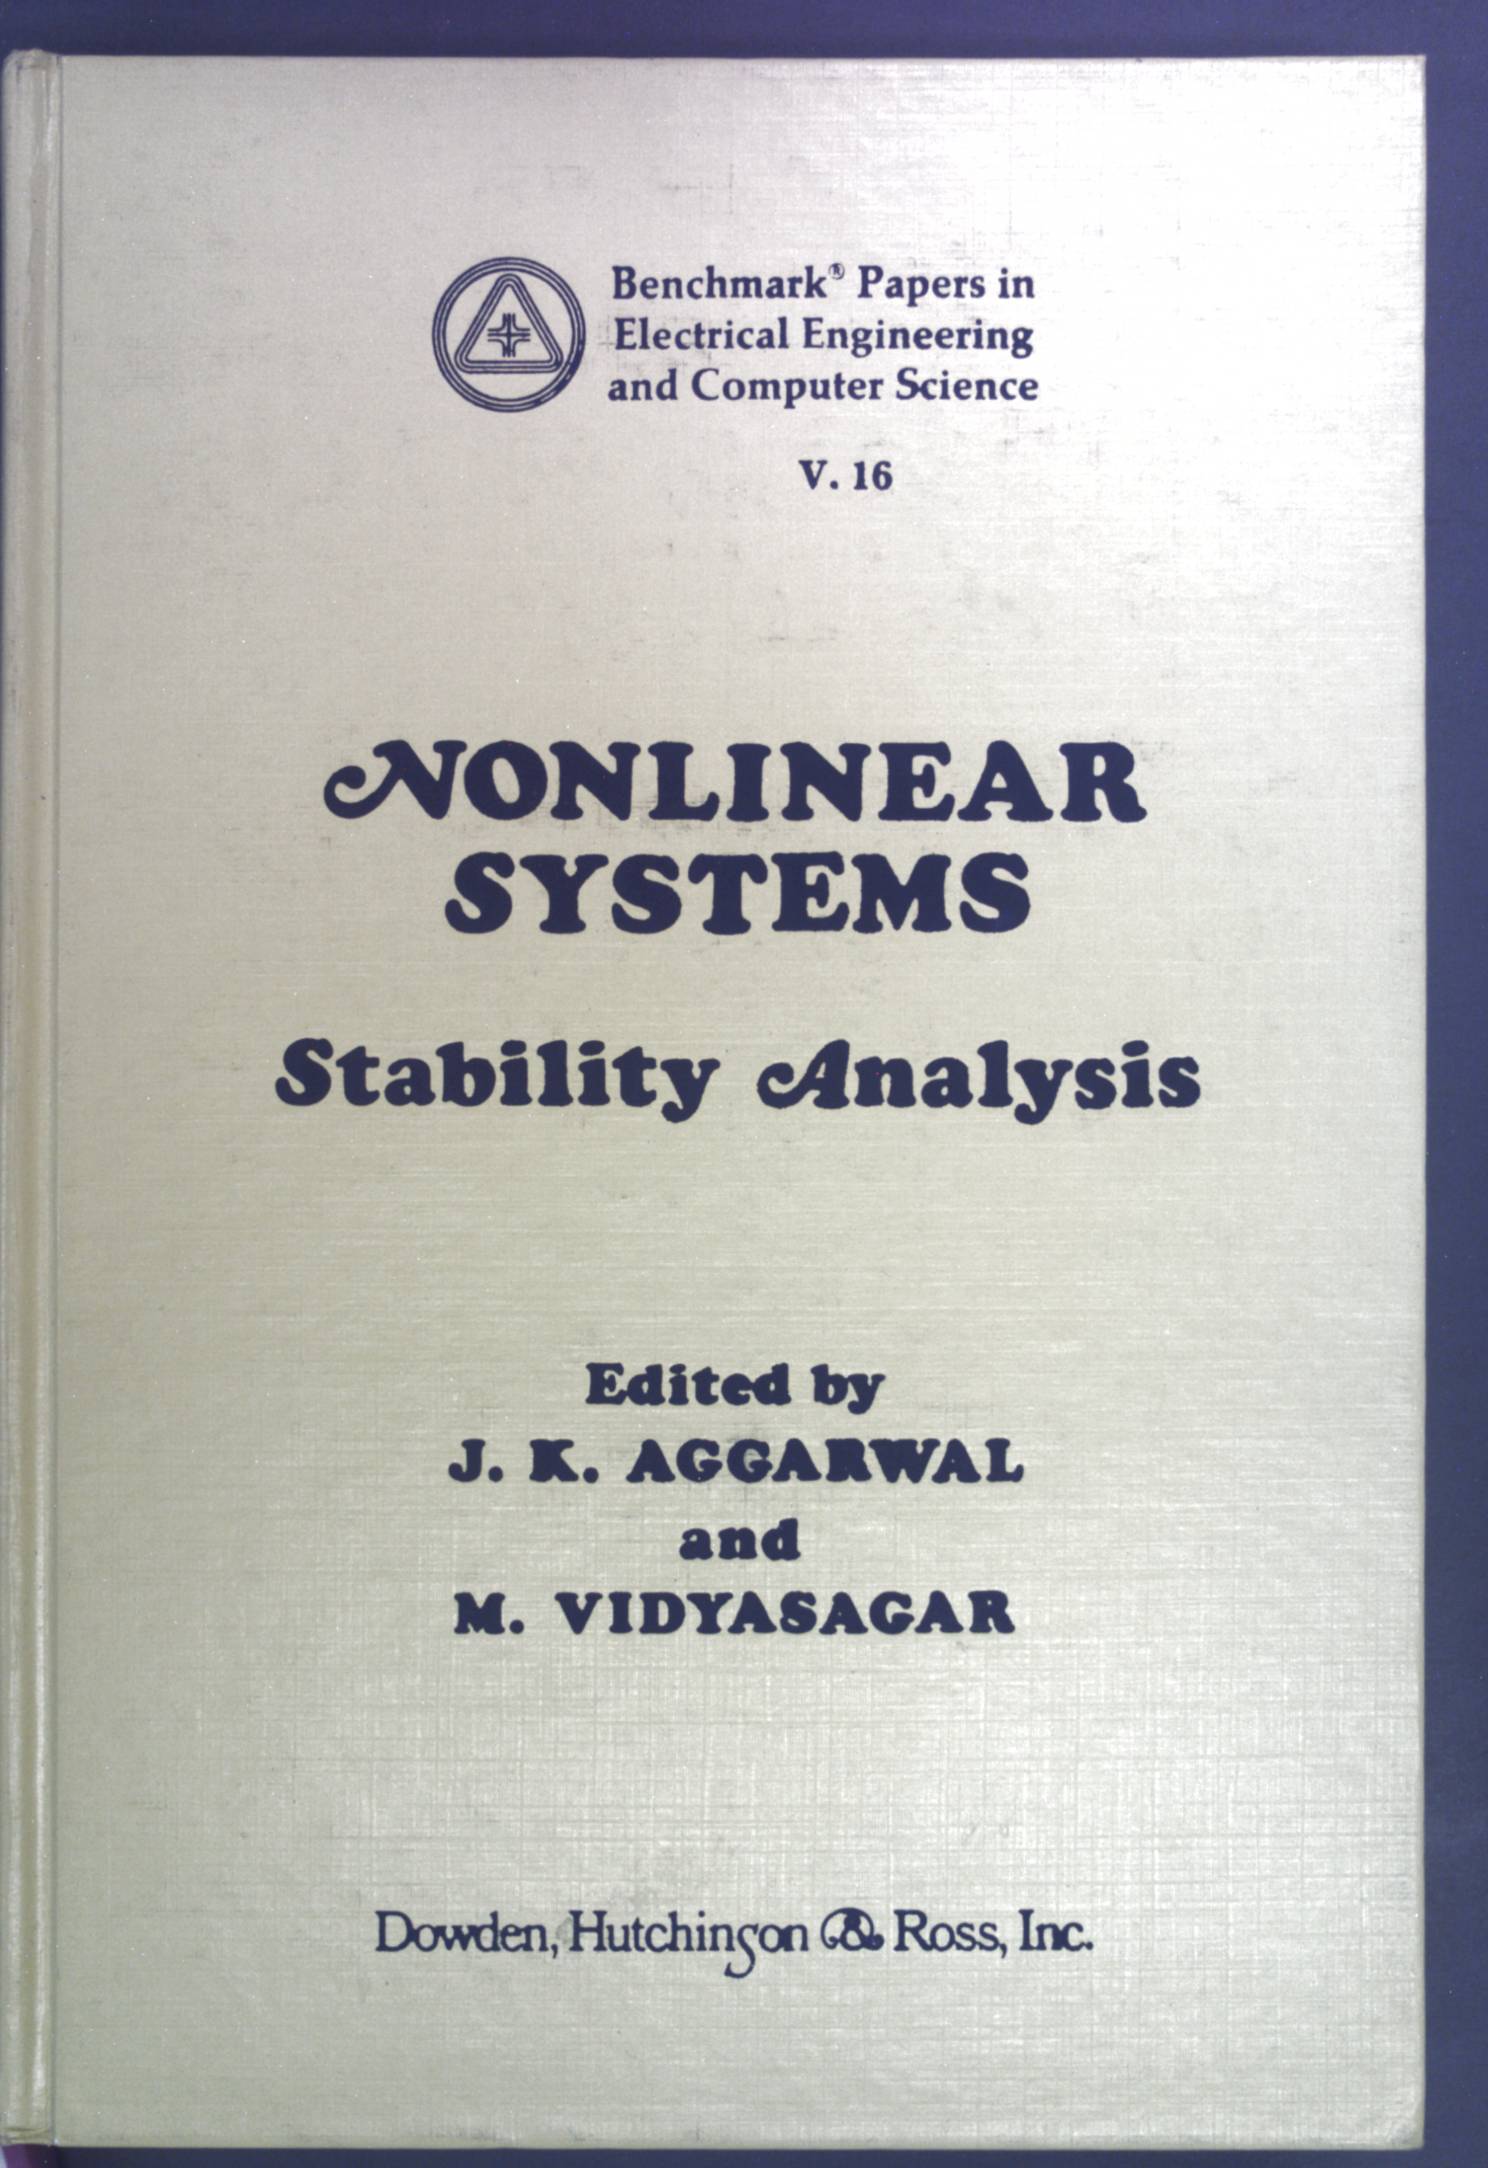 Nonlinear Systems: Stability Analysis. Benchmark Papers in Electrical Engineering and Computer Science 16 - Aggarwal, J.K. and M. Vidyasagar